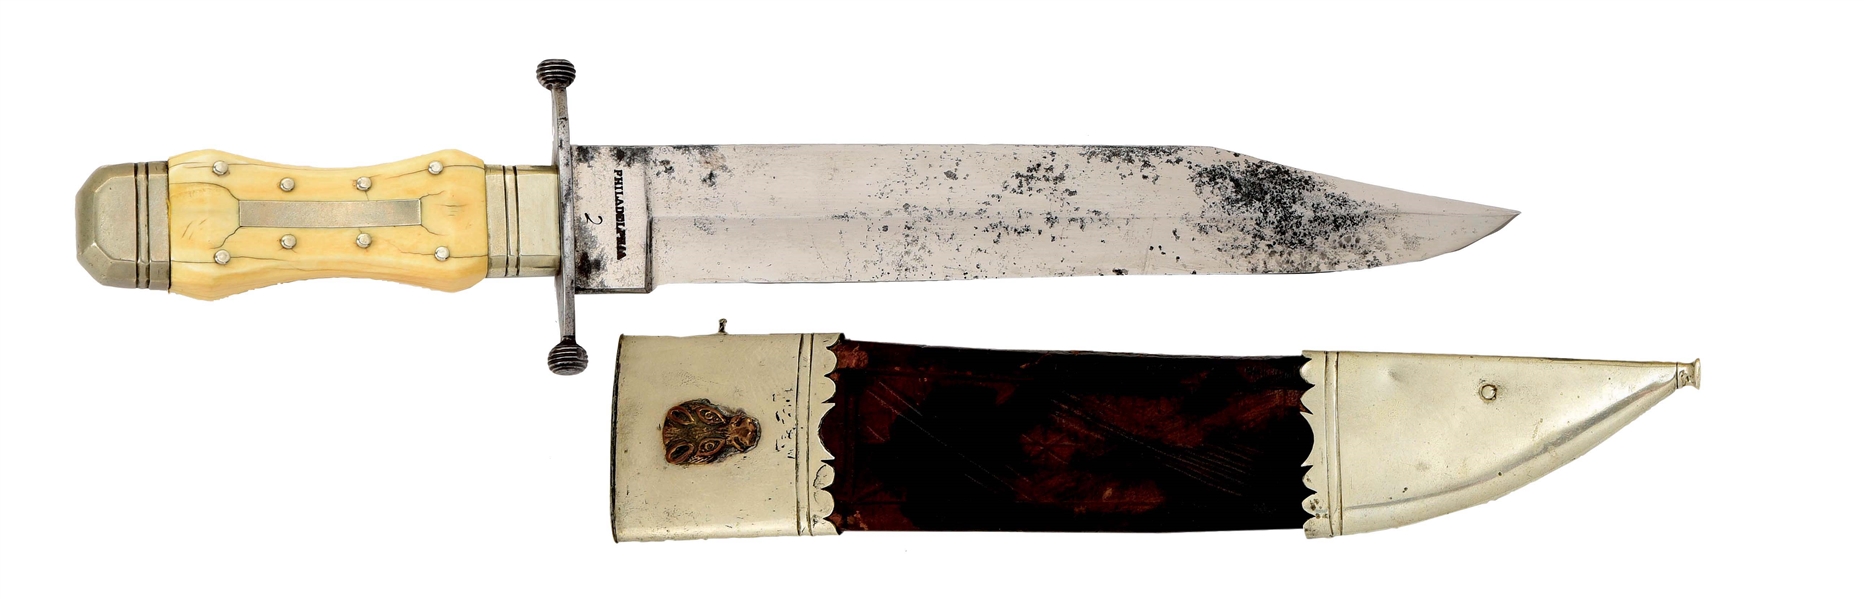 NEWLY DISCOVERED IVORY-HANDLED CLIP POINT BOWIE KNIFE BY BENGLISH & HUBERS, PHILADELPHIA.